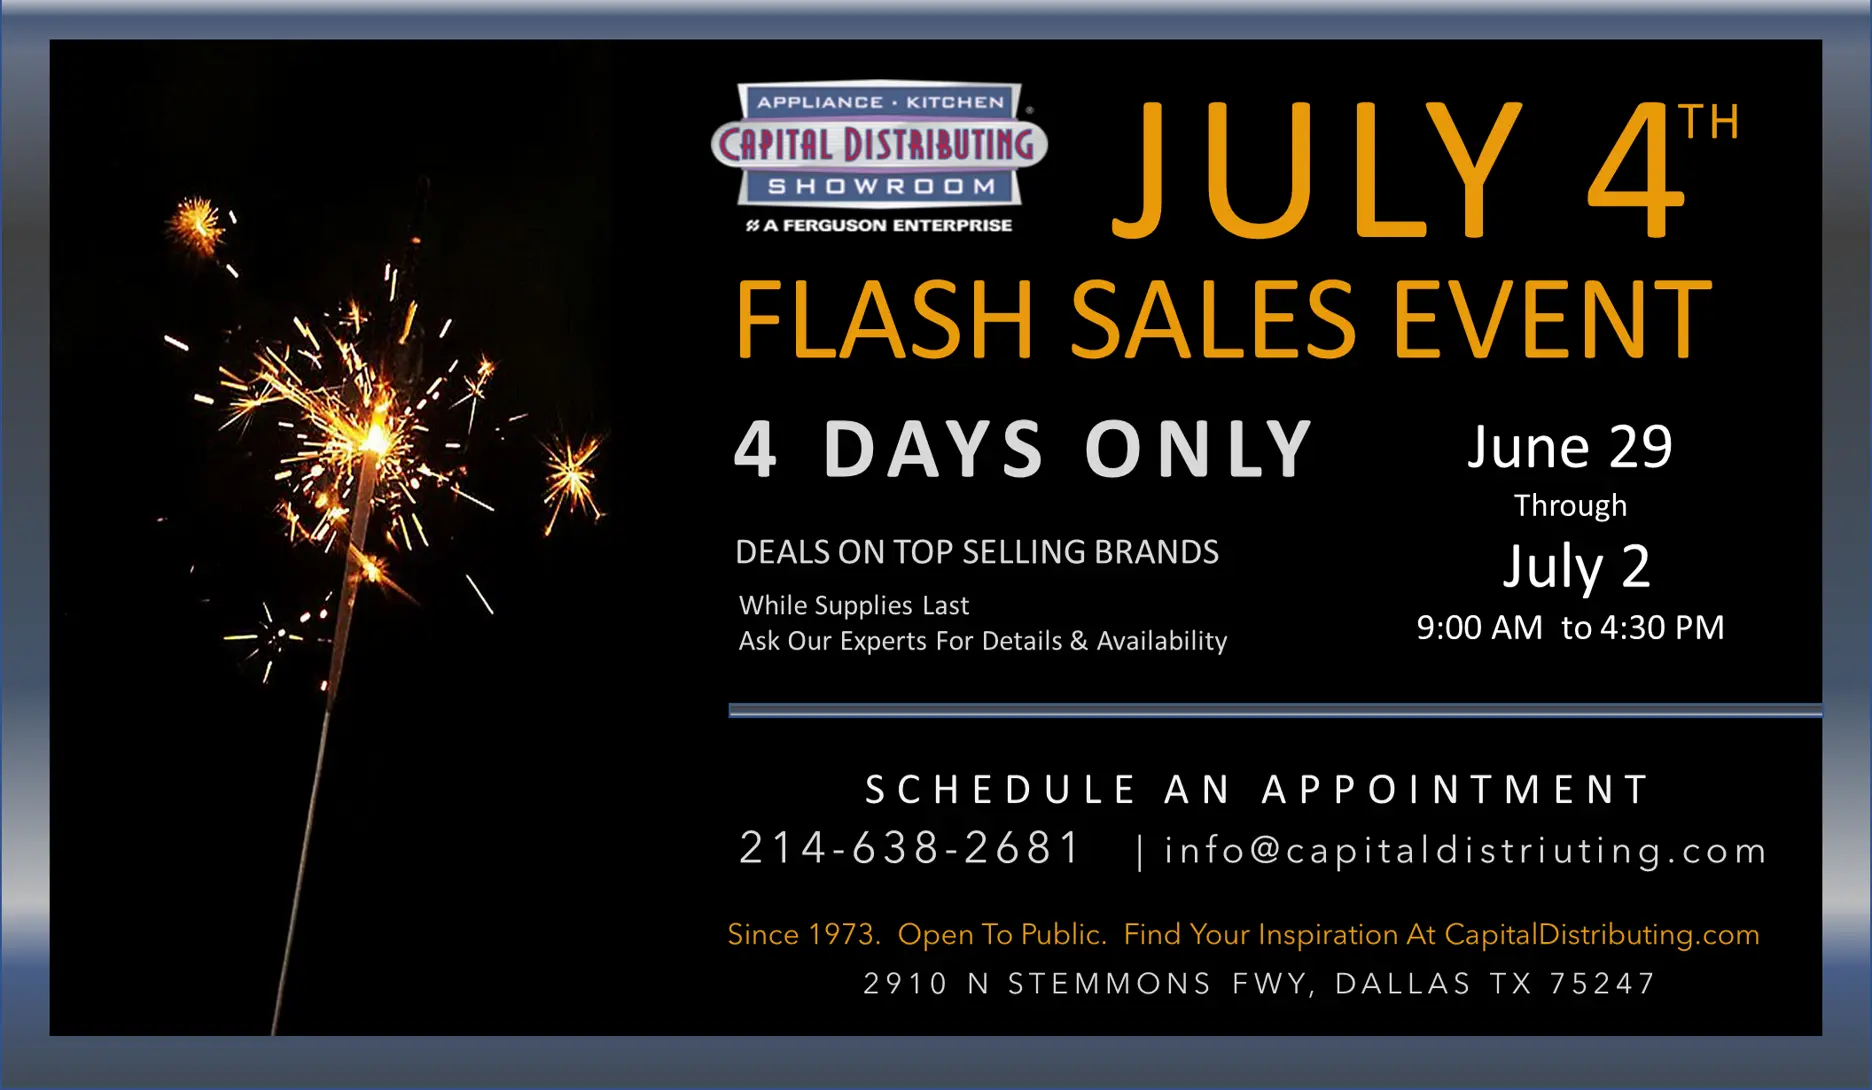 Capital Distributing July 4th Flash Sales Event 